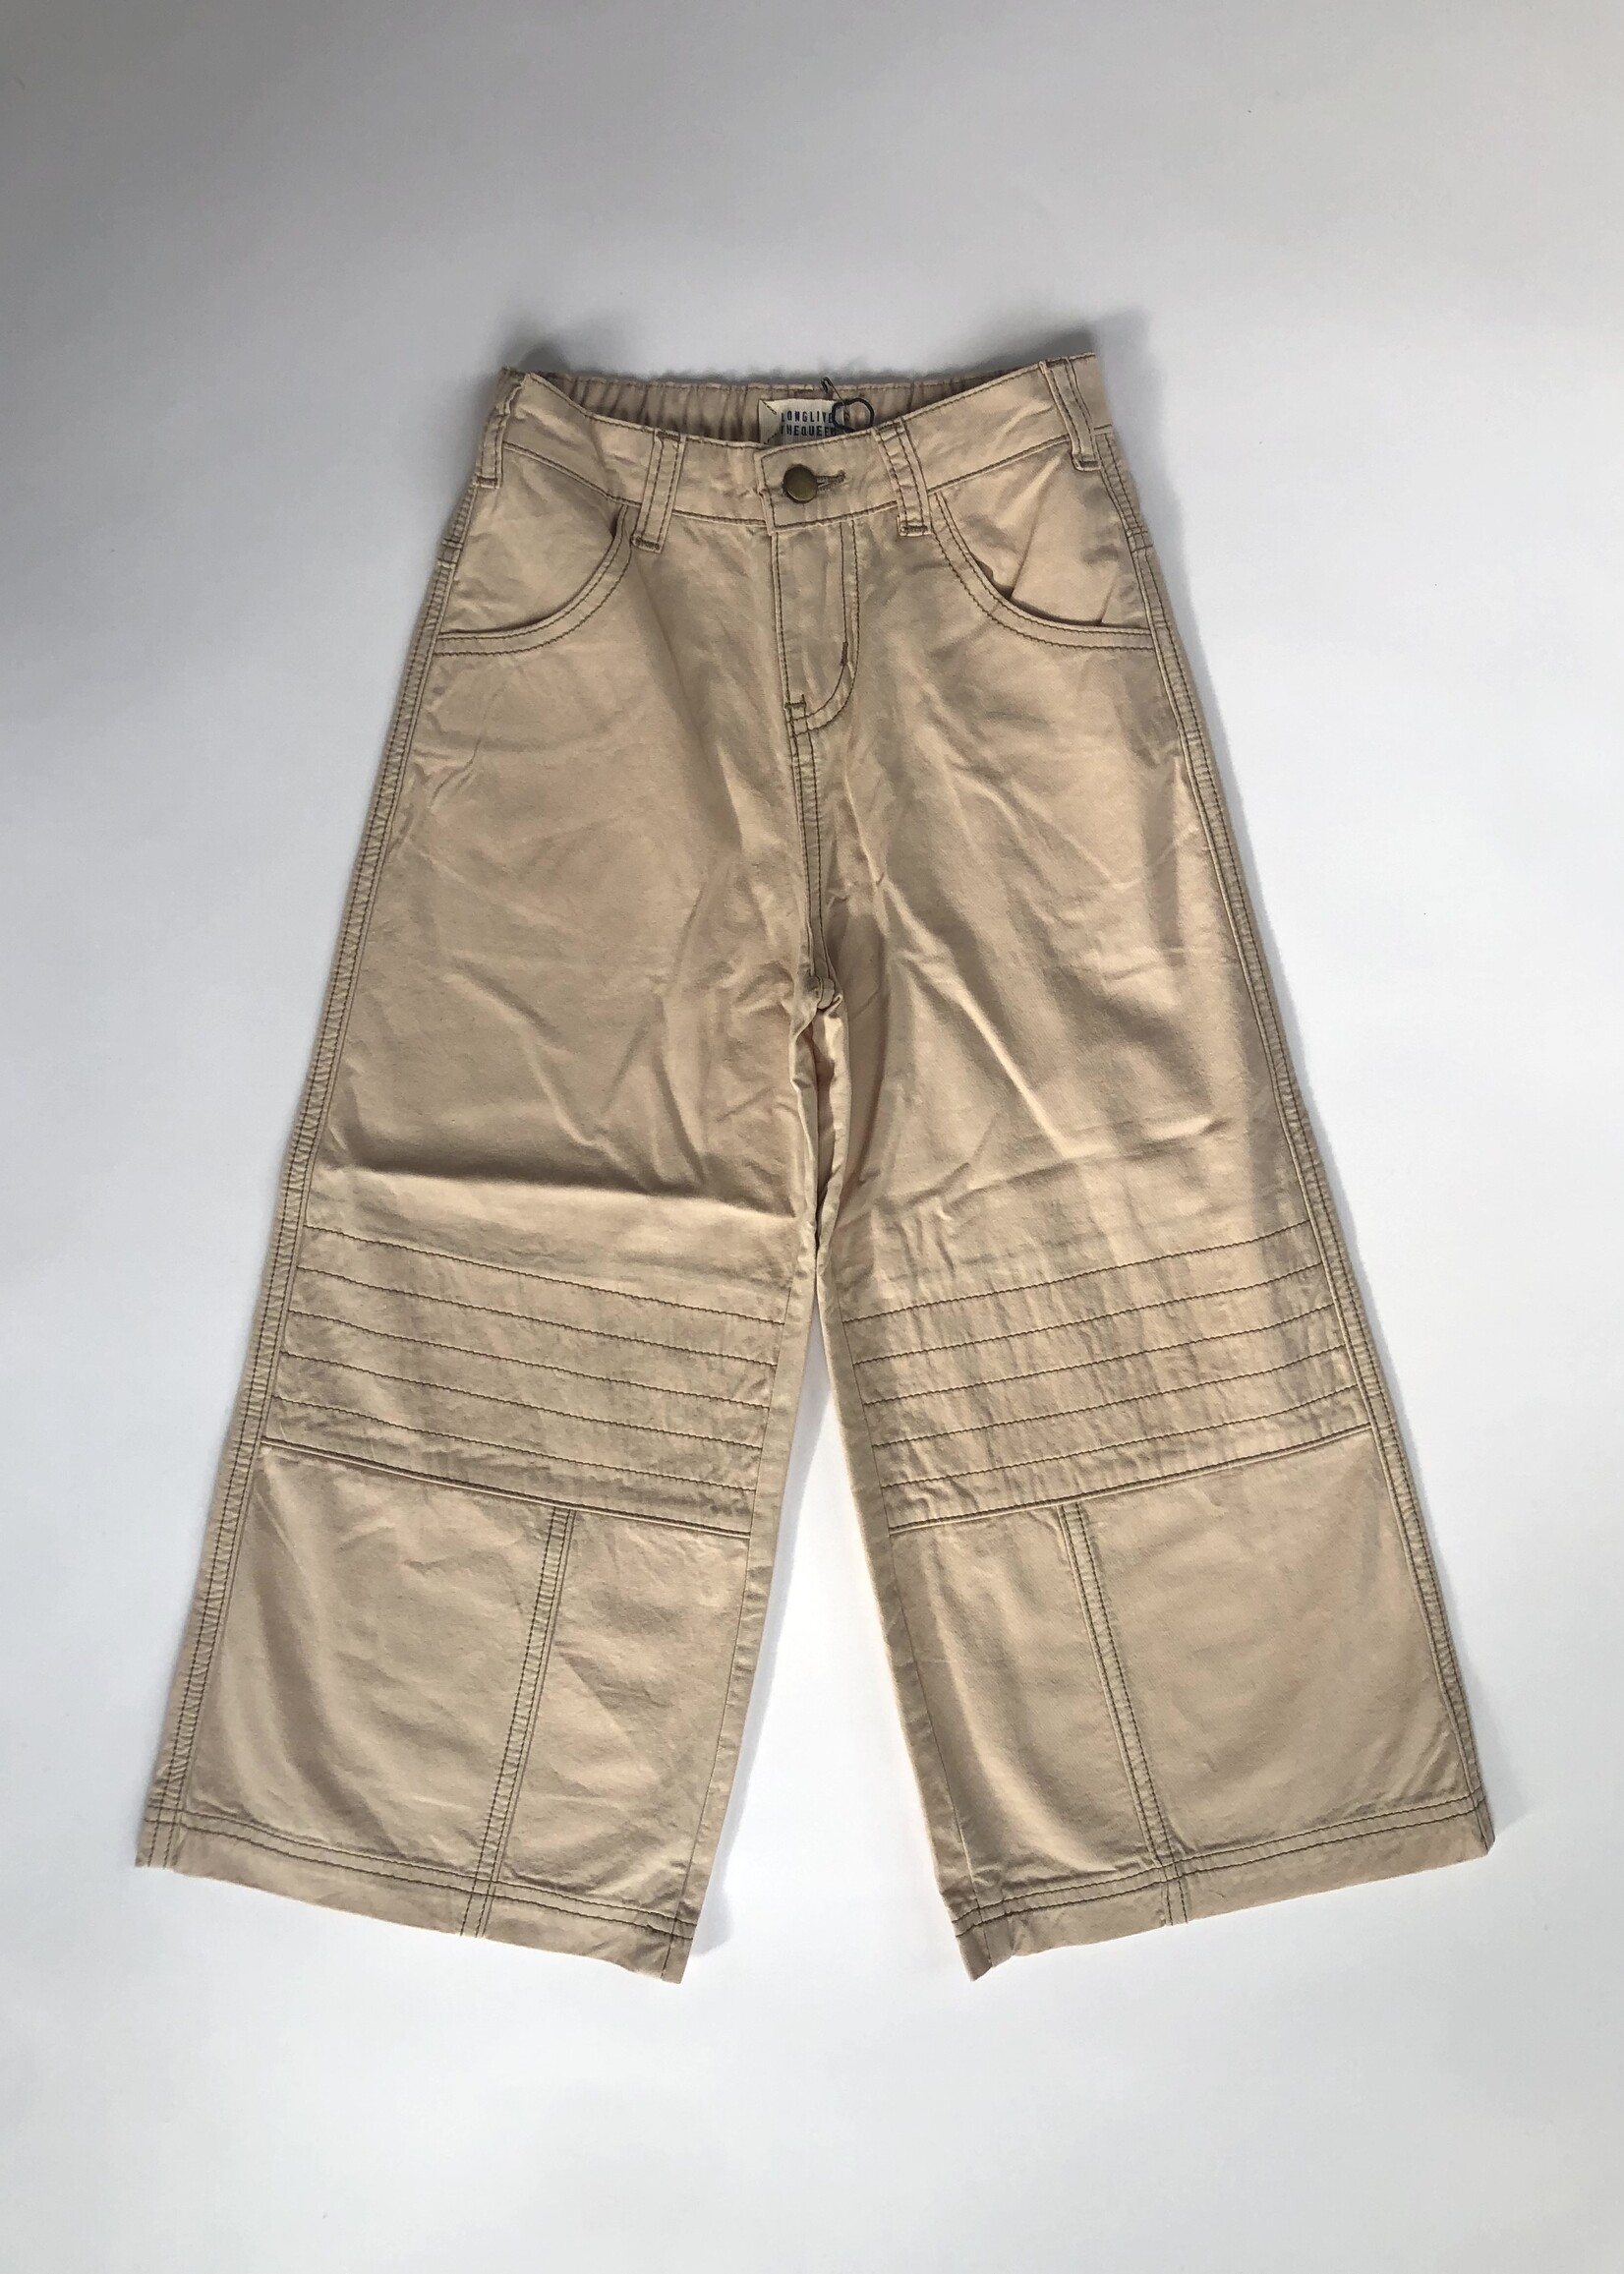 Long Live The Queen Sand wide fit pants 8y